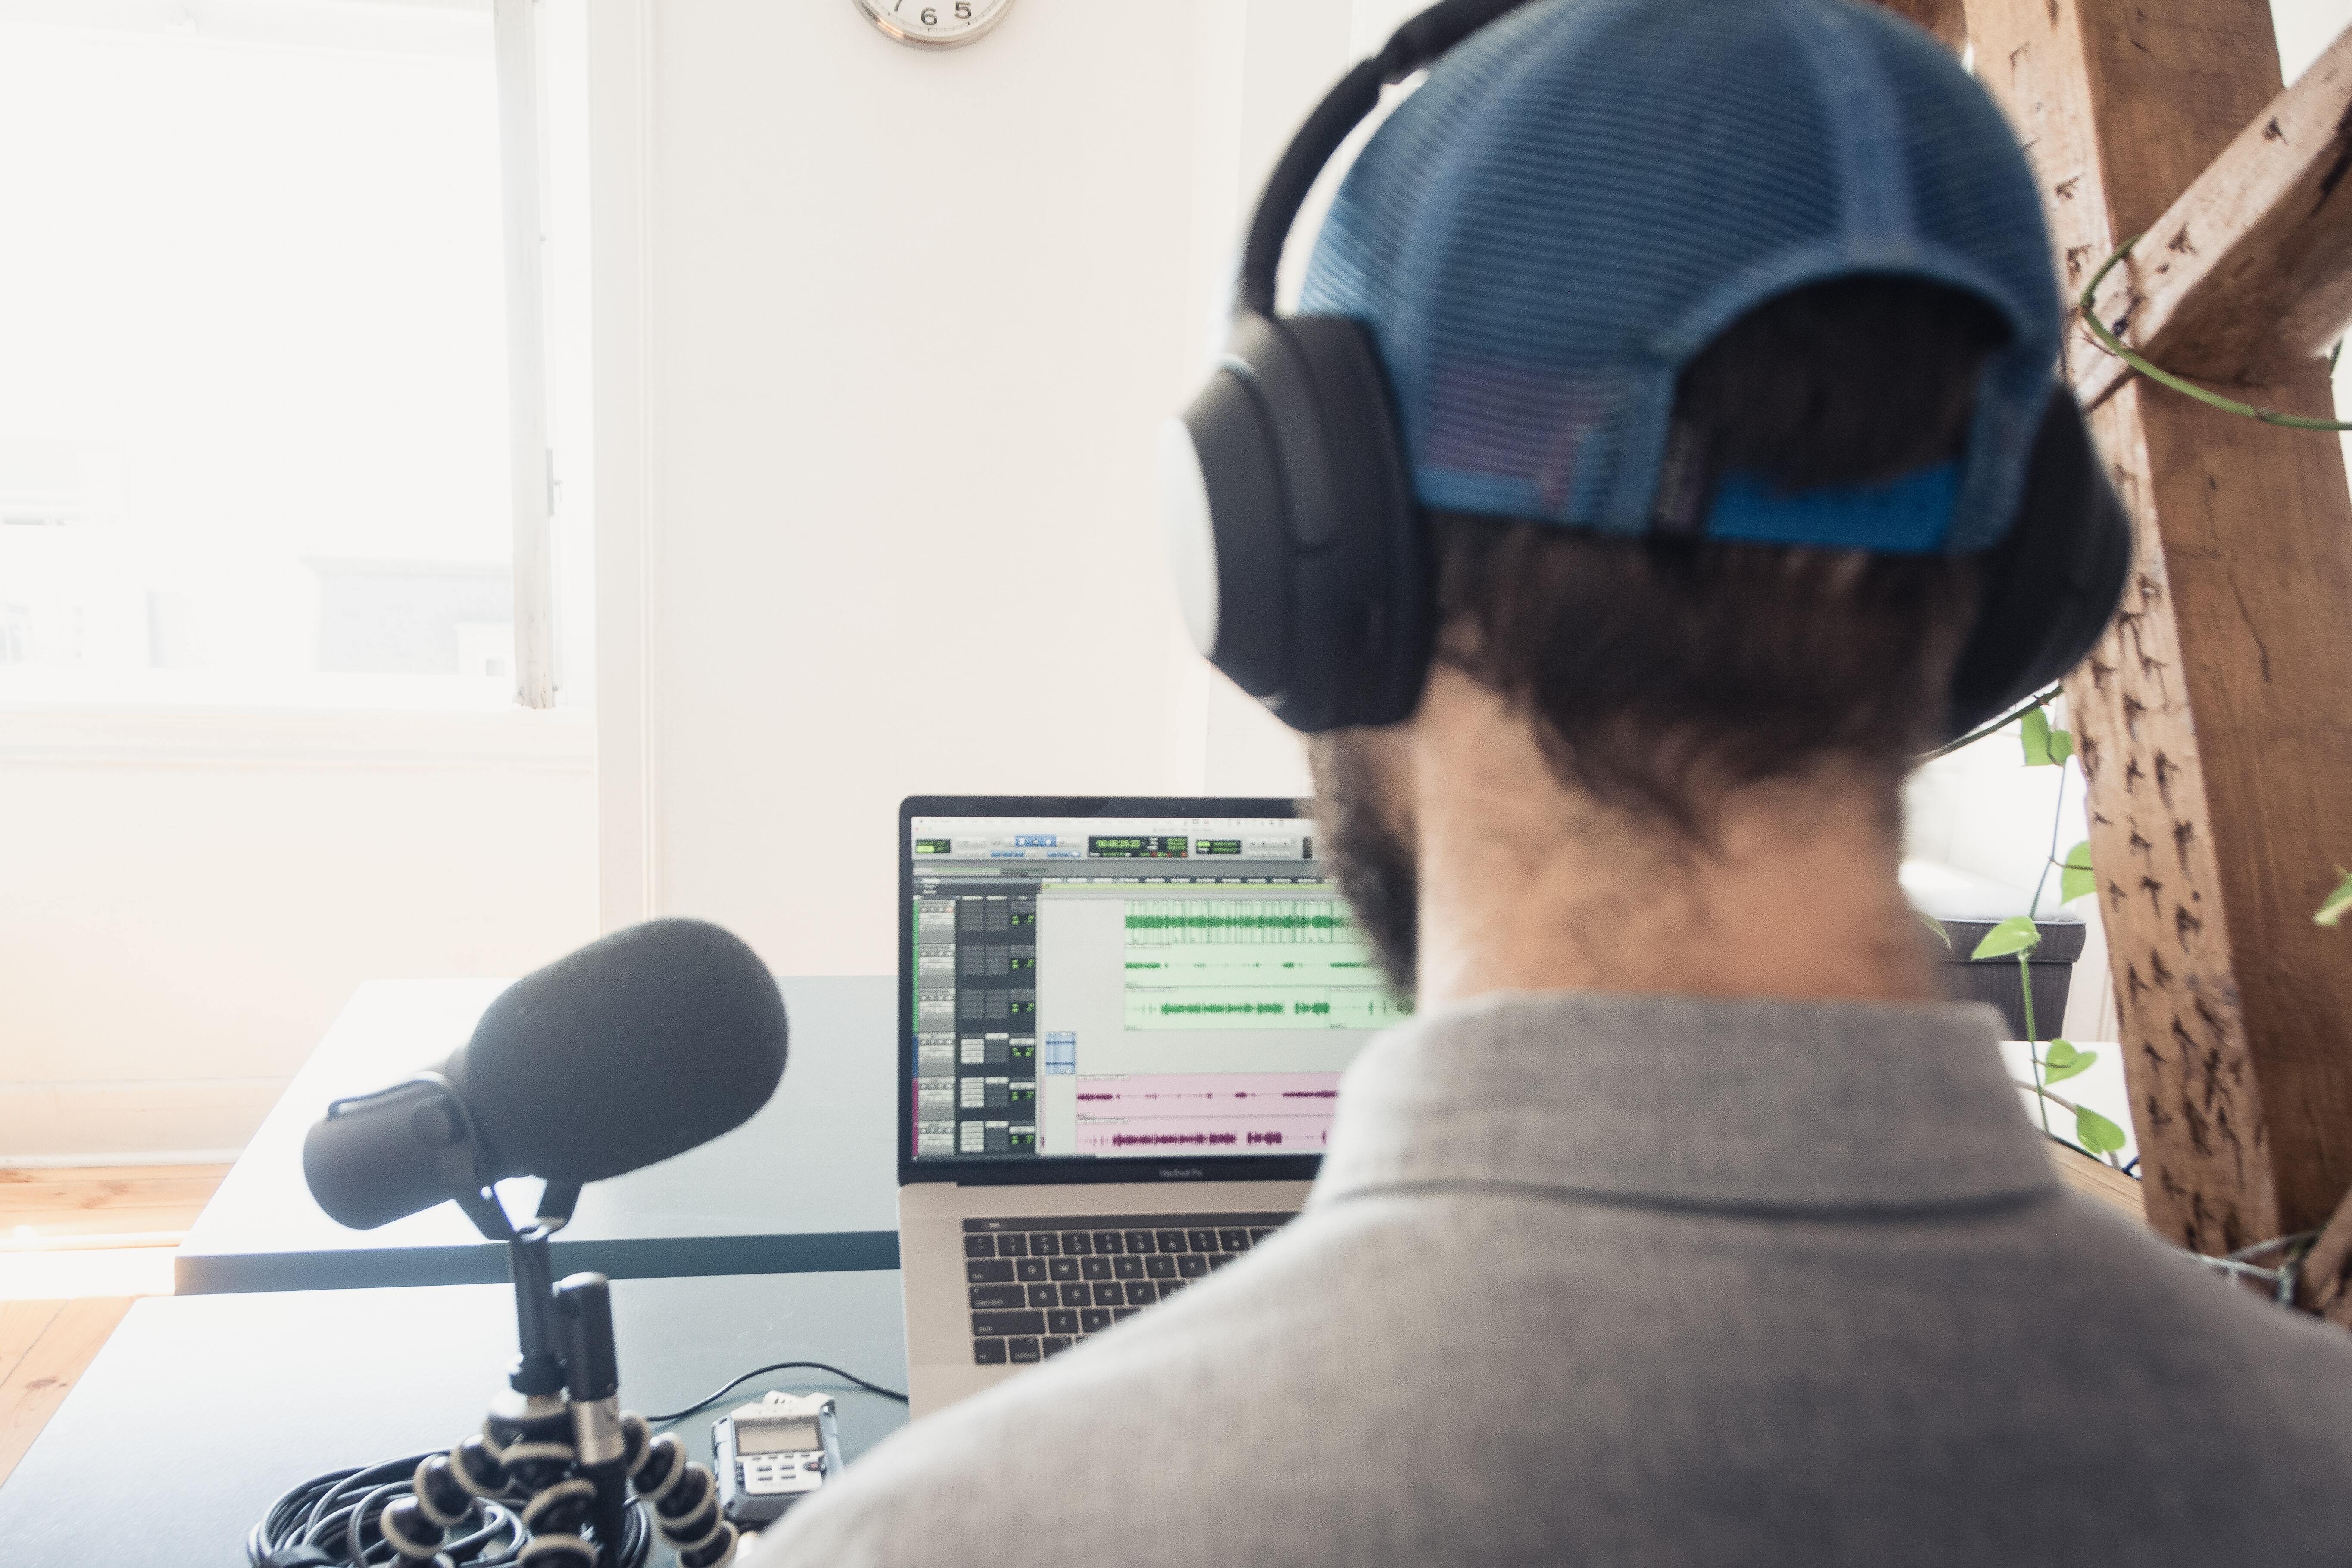 Podcasting as a job